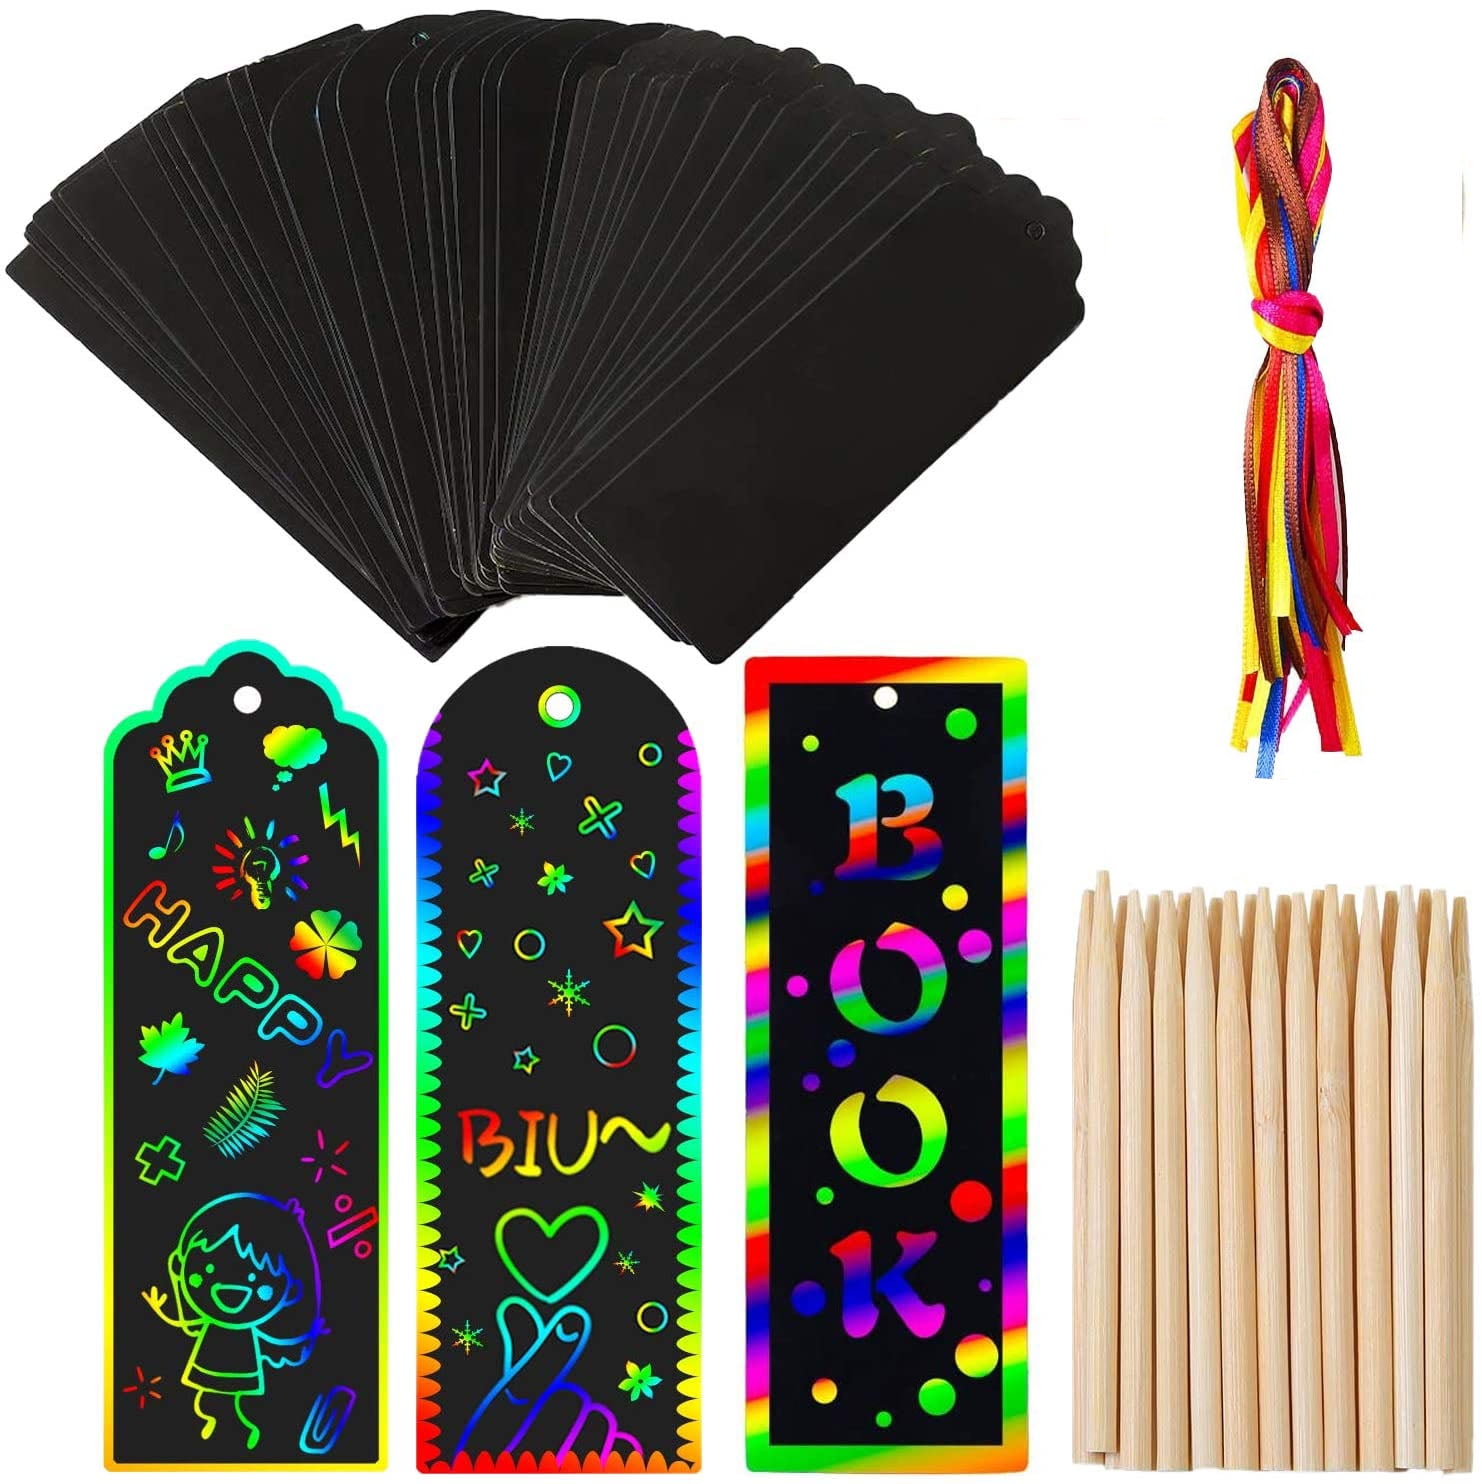 Bamboo Stylus Elcoho 48 Set Scratch Art Bookmark Paper Rainbow DIY Gift Tags with Satin Ribbons Rope for Party and Craft Supplies 